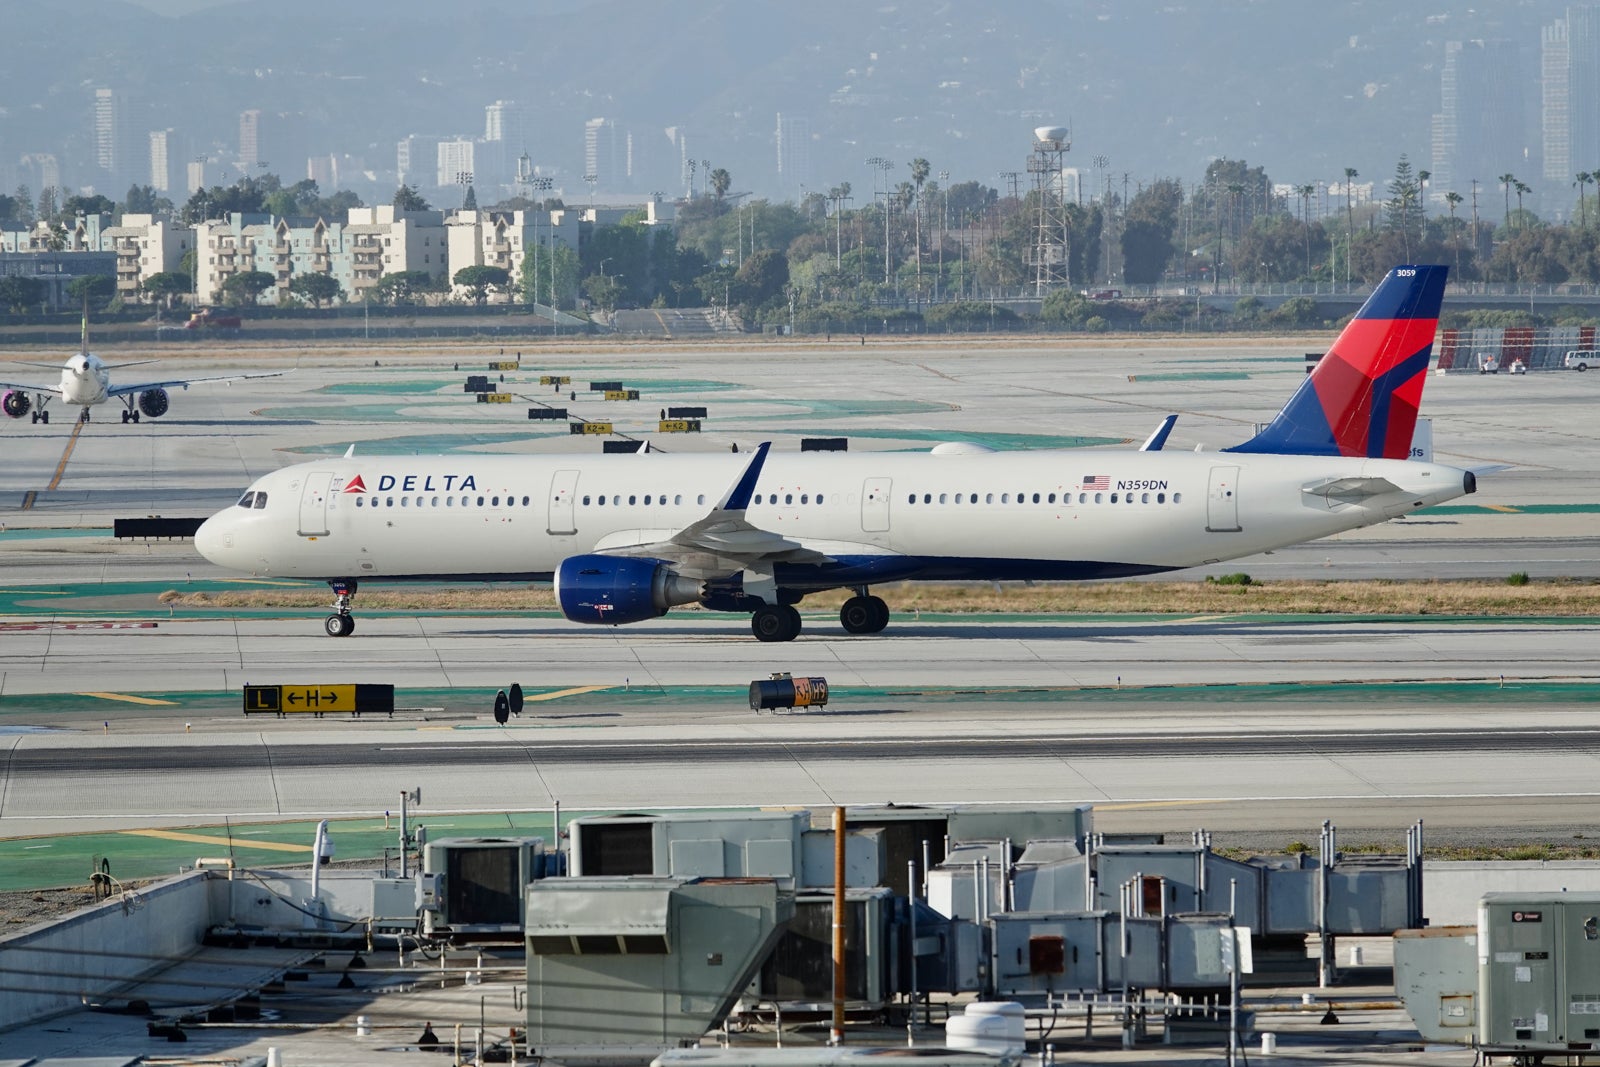 Delta goes up against American and JetBlue with 2 new routes, 5 cuts